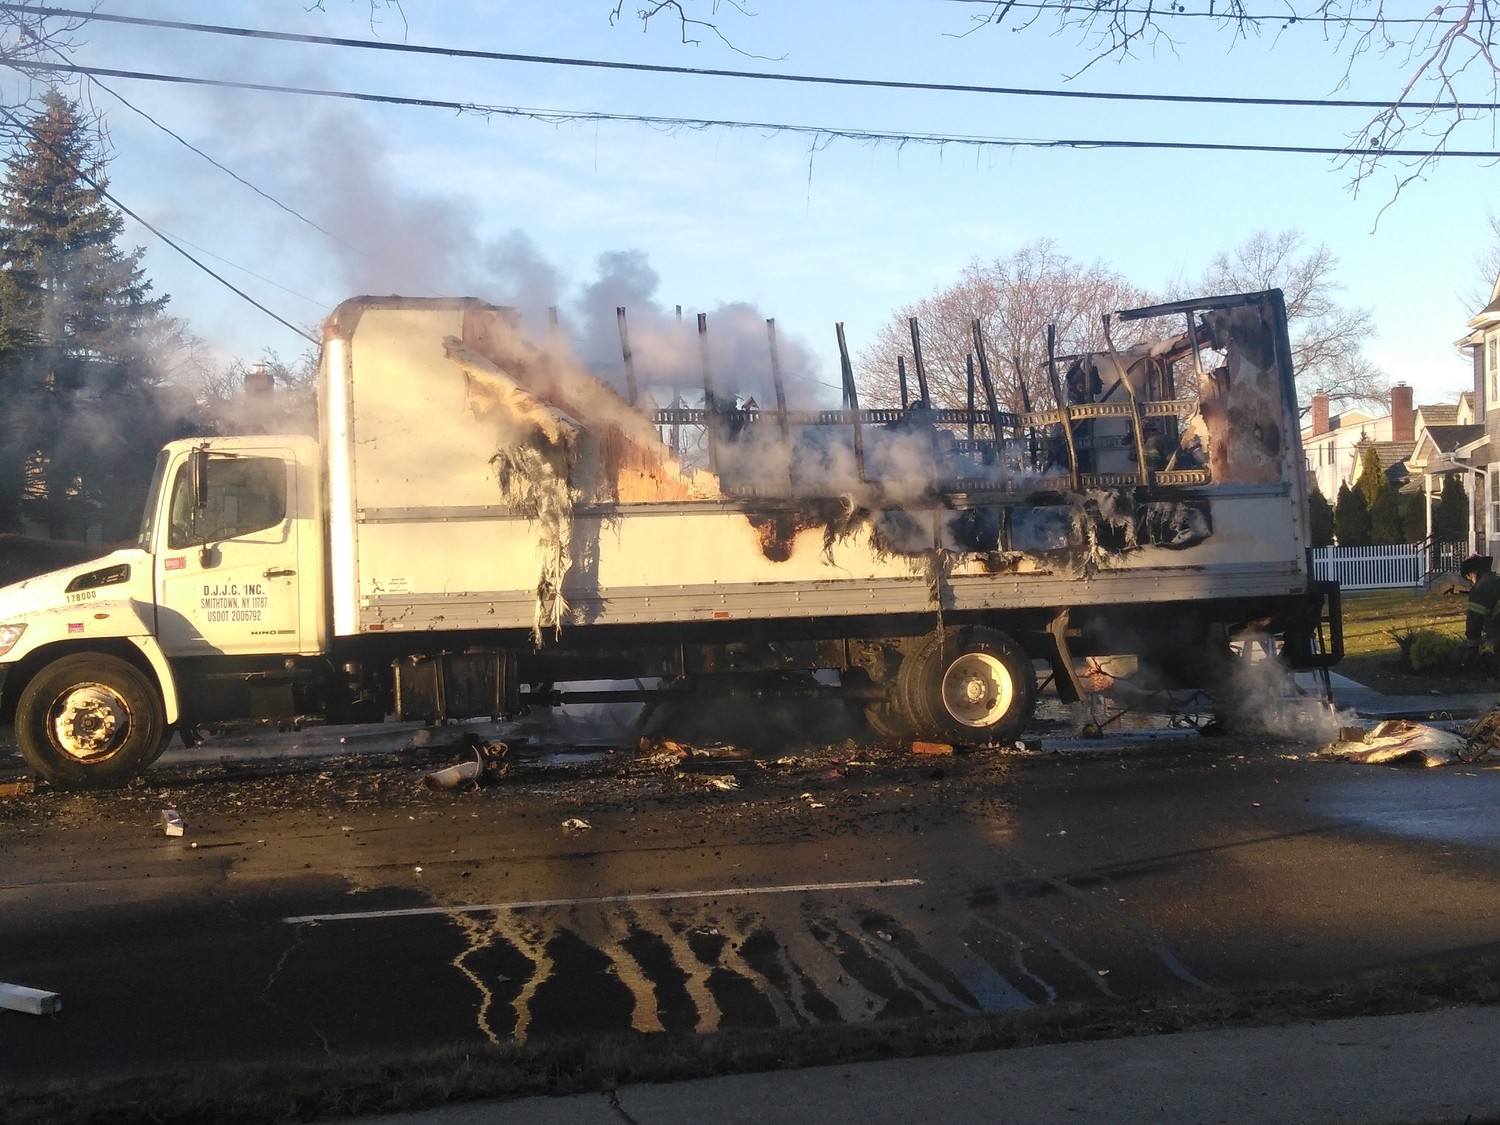 The cargo area of the truck was deemed a complete loss by East Meadow Fire Department officials.